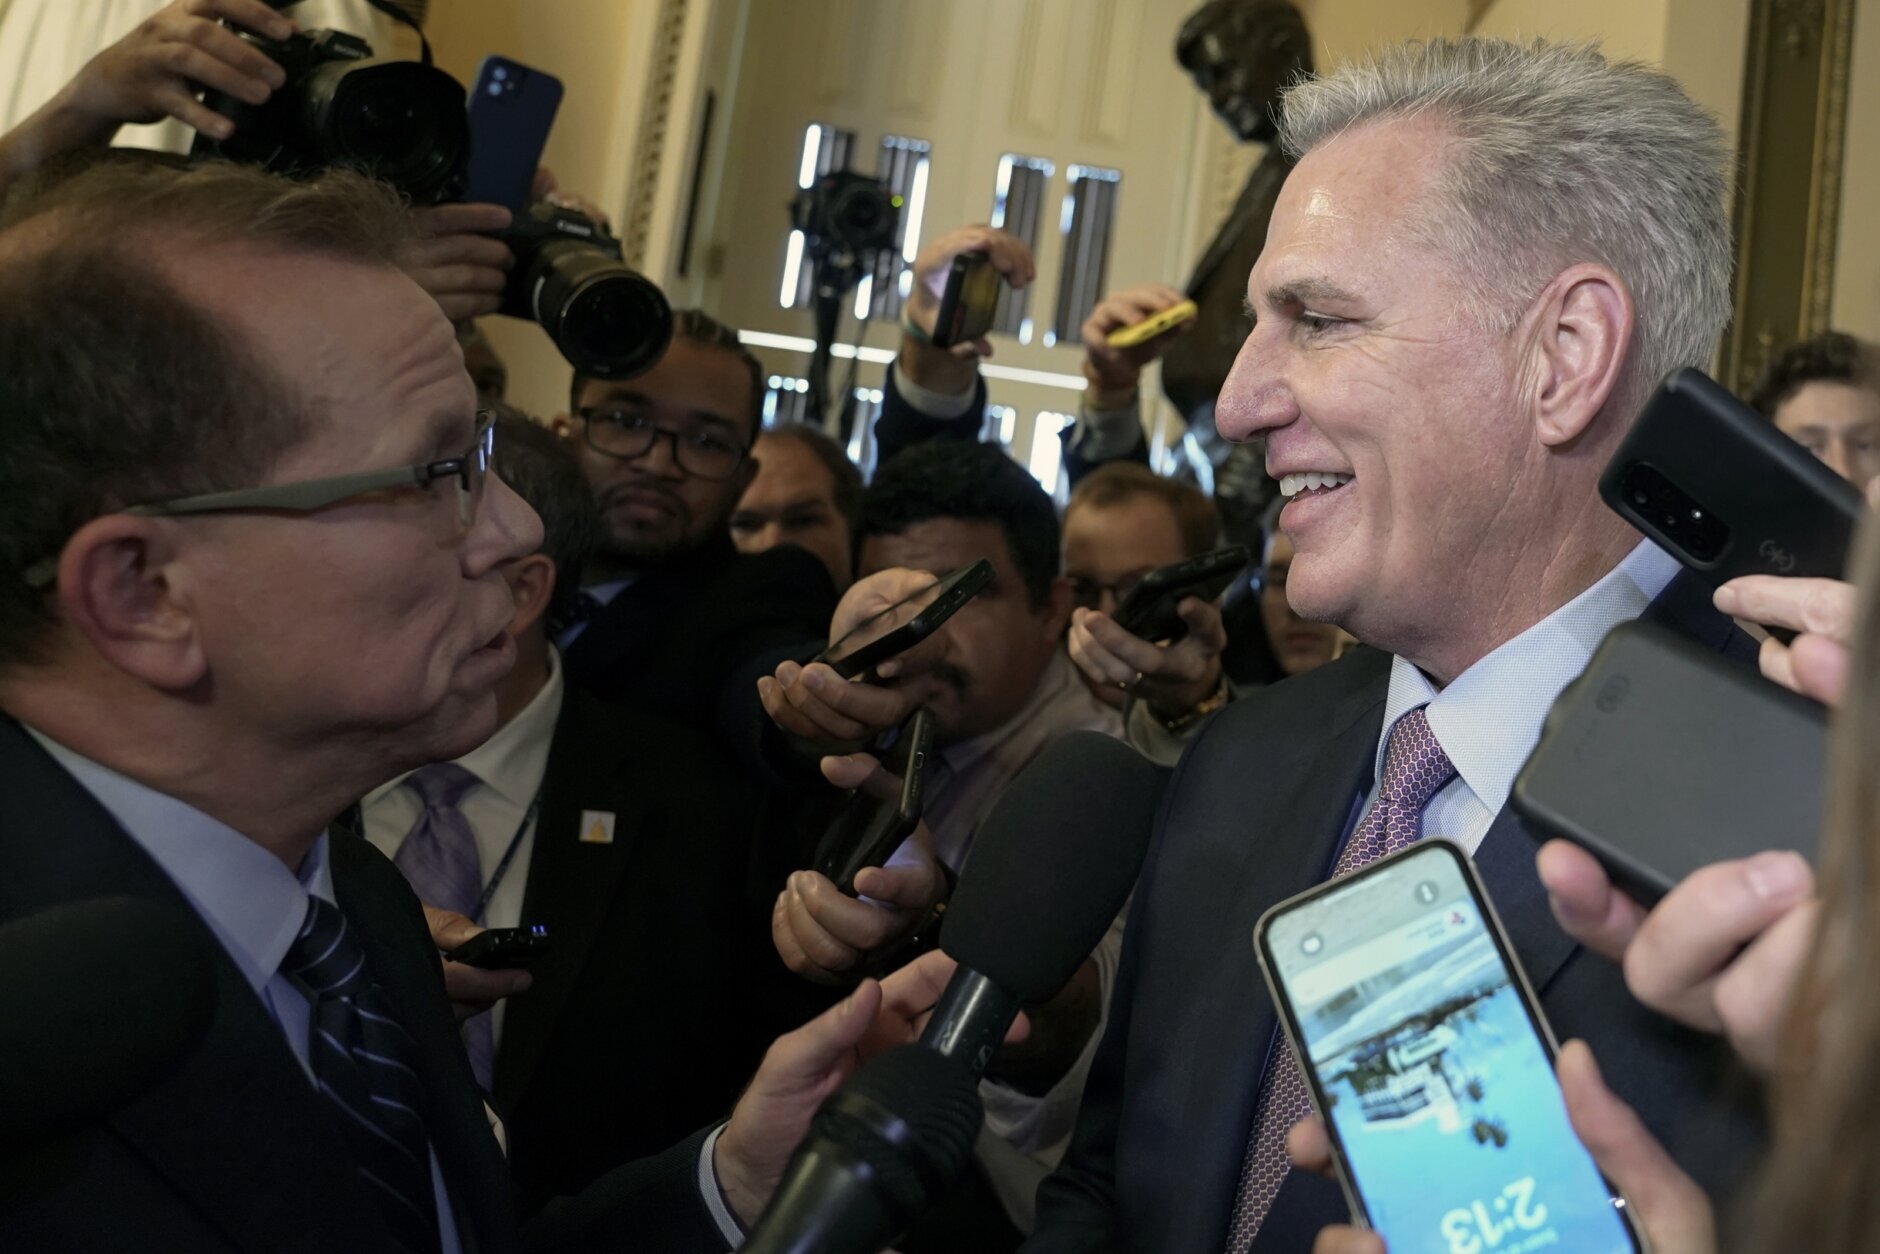 Speaker McCarthy ousted in historic House vote, as scramble begins for ...